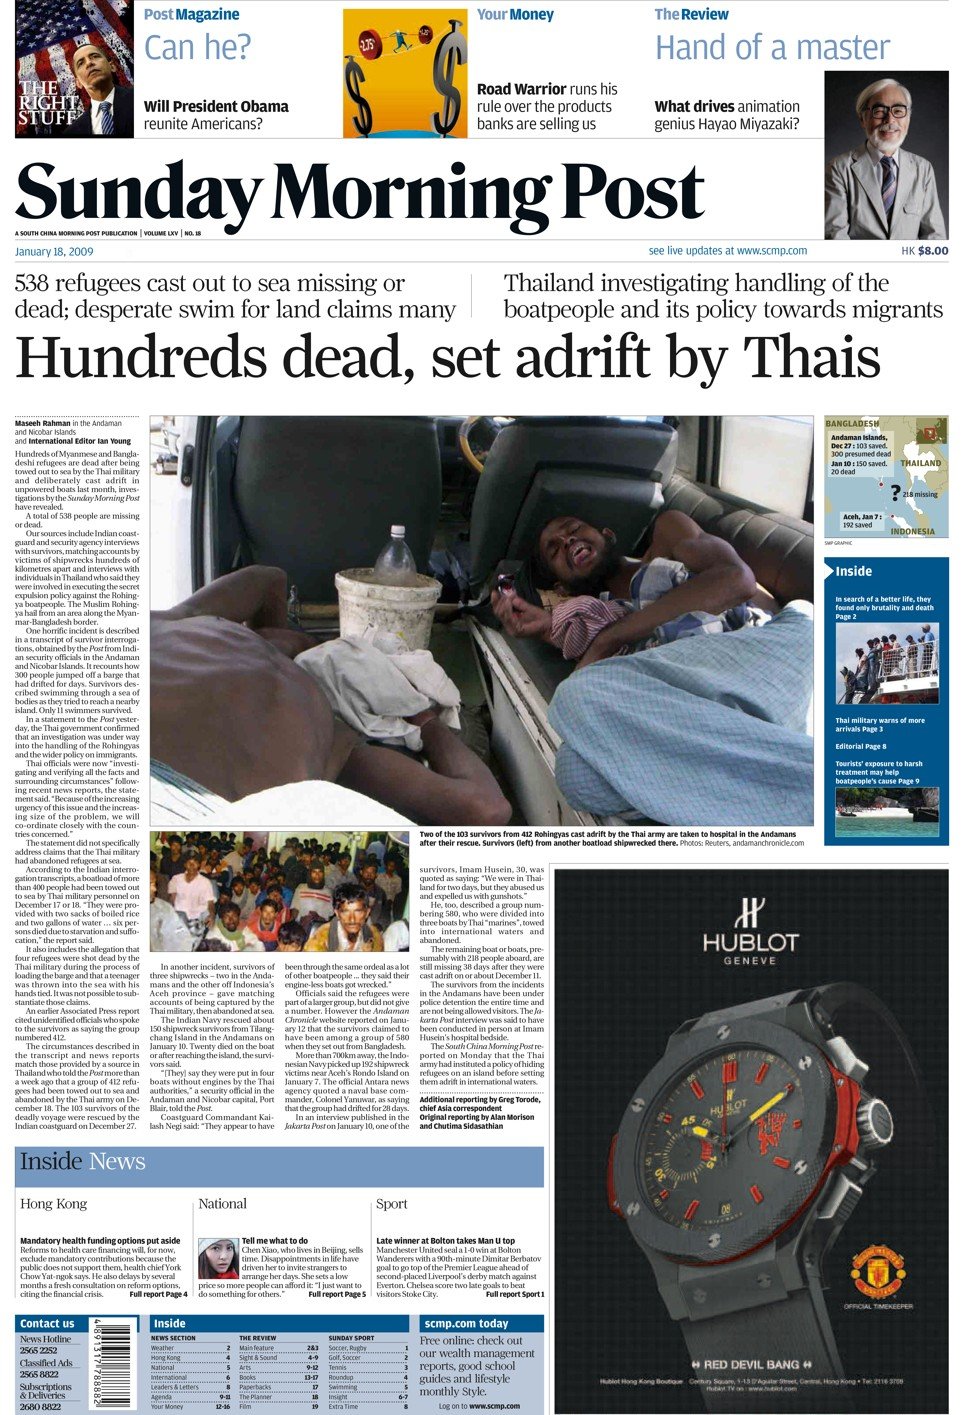 The Post’s coverage from January 2009.